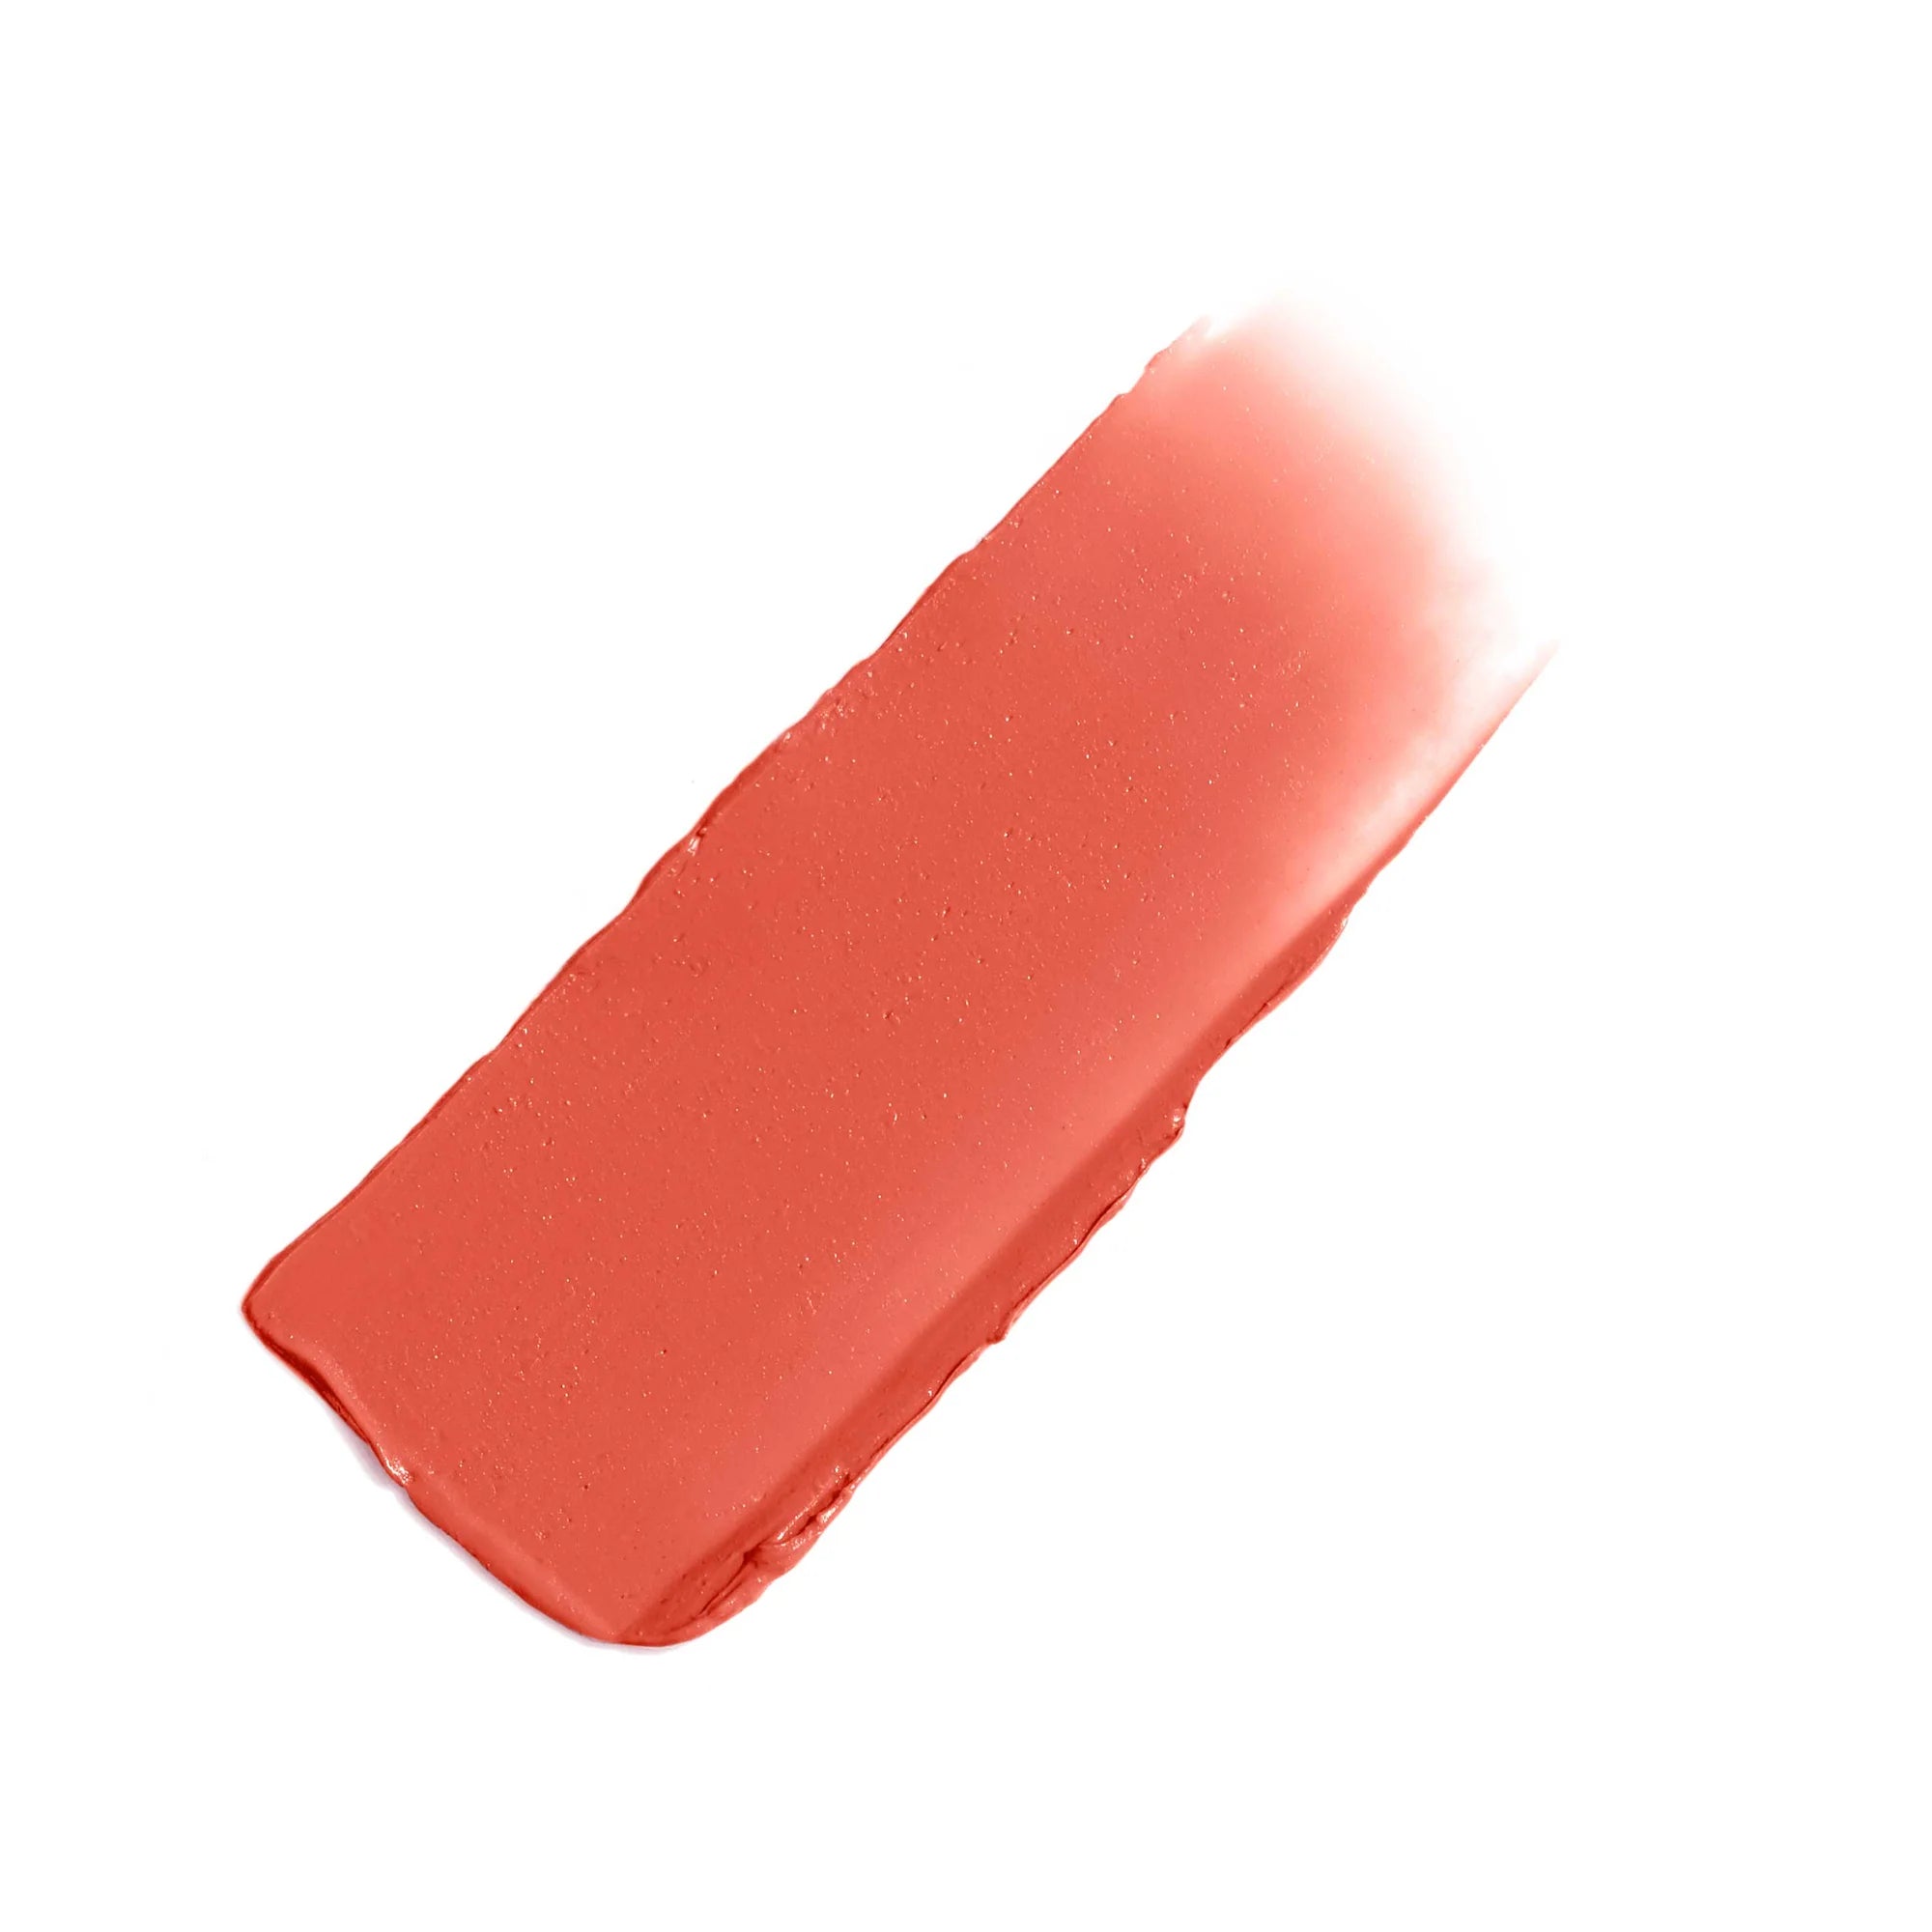 Jane Iredale's Glow Time Blush Stick - shade Afterglow - bright coral pink with no-shimmer